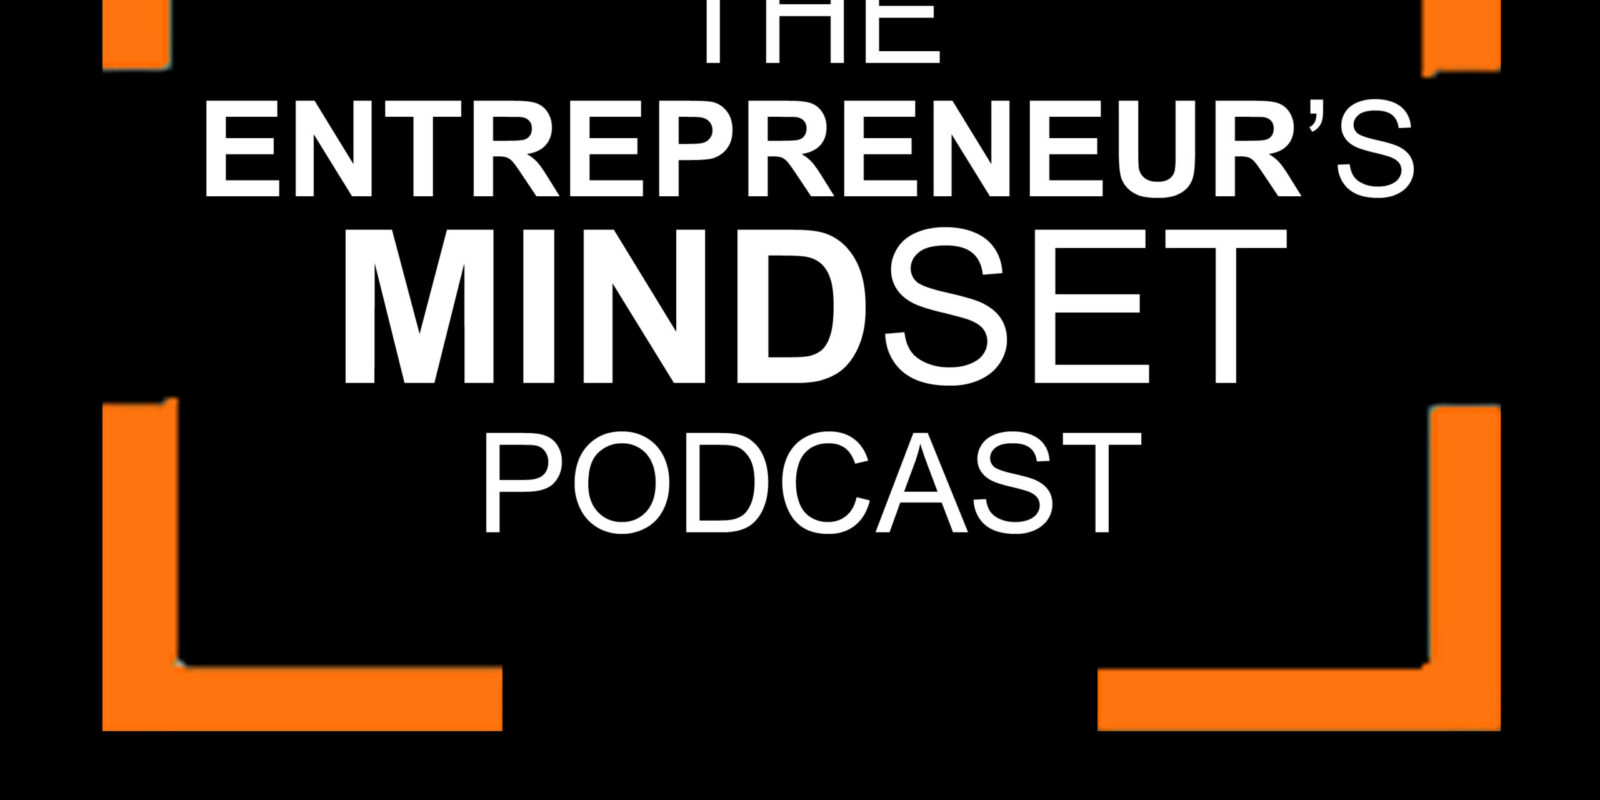 [Podcast] How is your life-purpose connected to your business success?